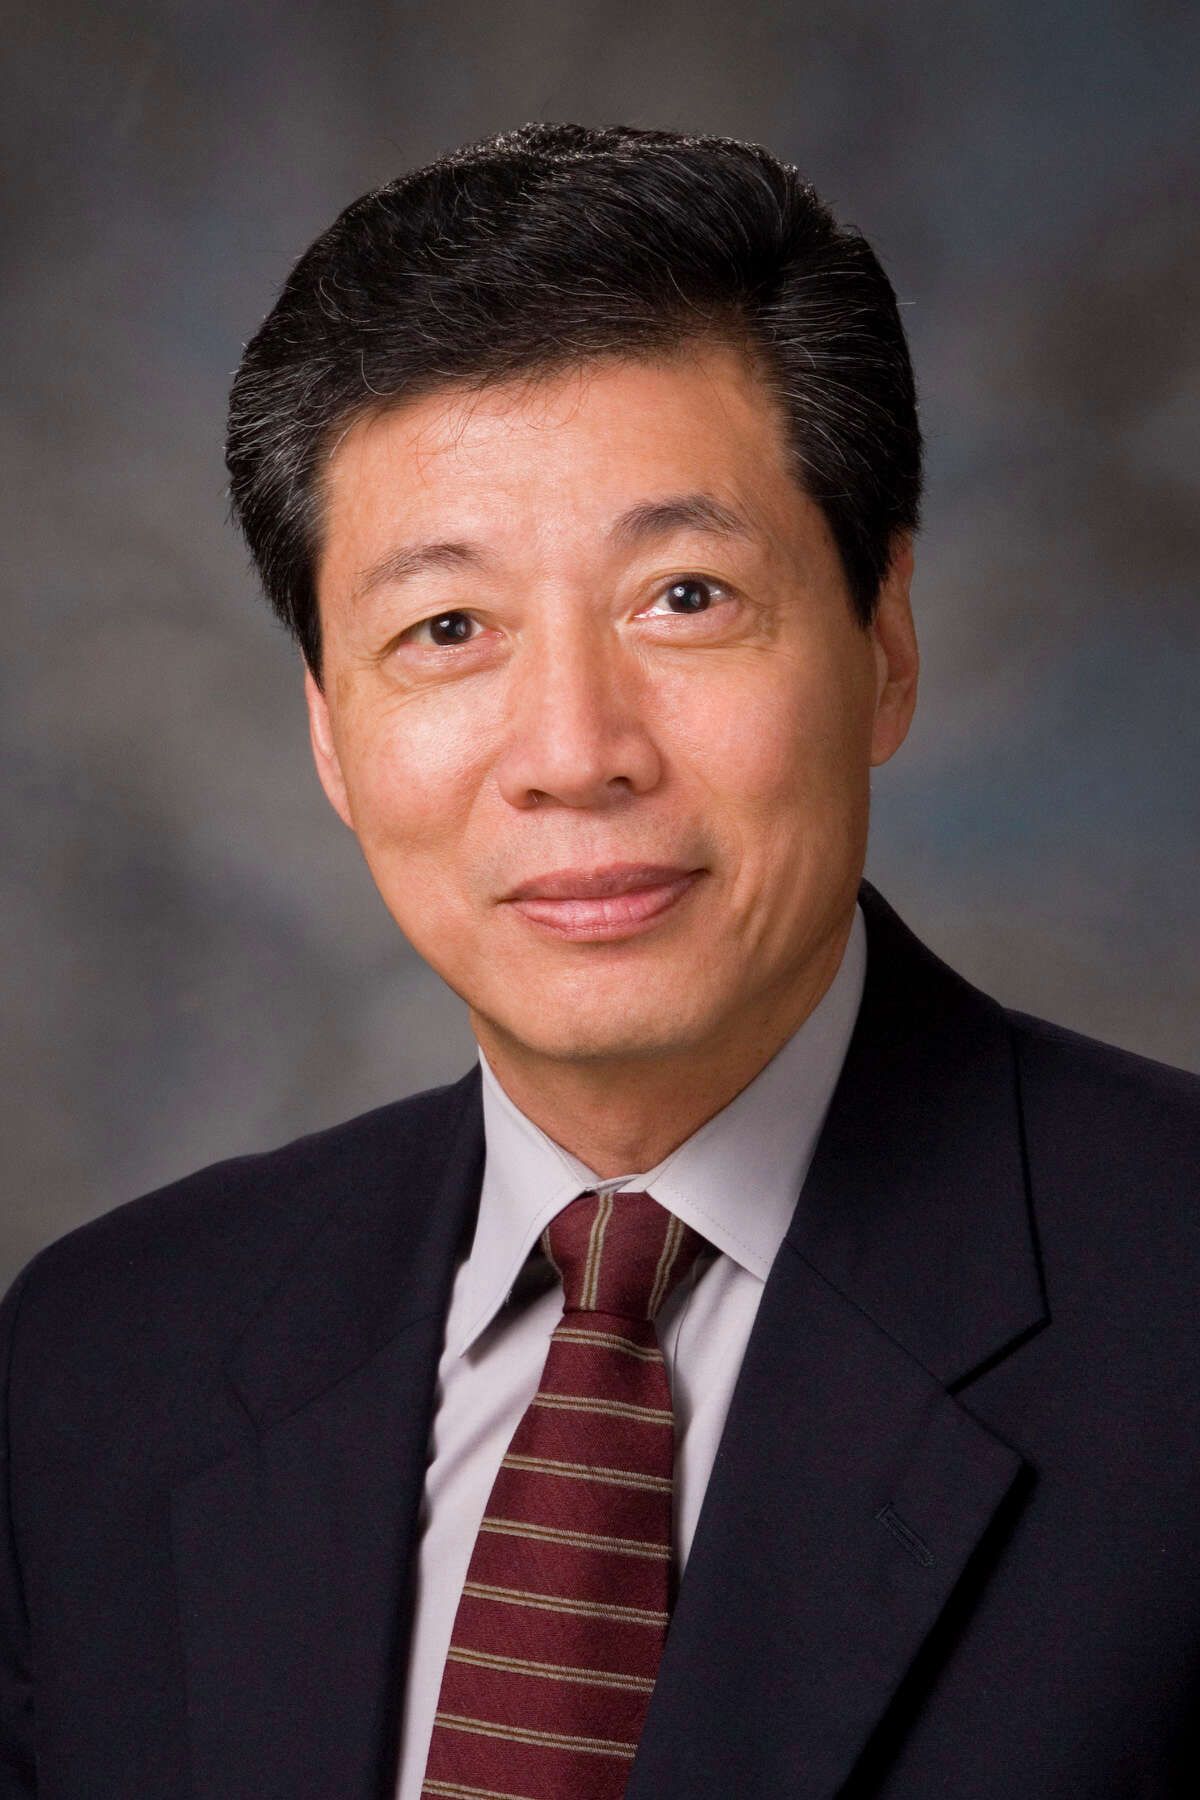 Dr. Kian Ang, a renown cancer physician at MD Anderson, has died. Beloved by his colleagues, Ang has been an influential figure in MD Anderson tradition of ringing the bell at the finish of radiation treatments. Photo credit: Courtesy of MD Anderson.